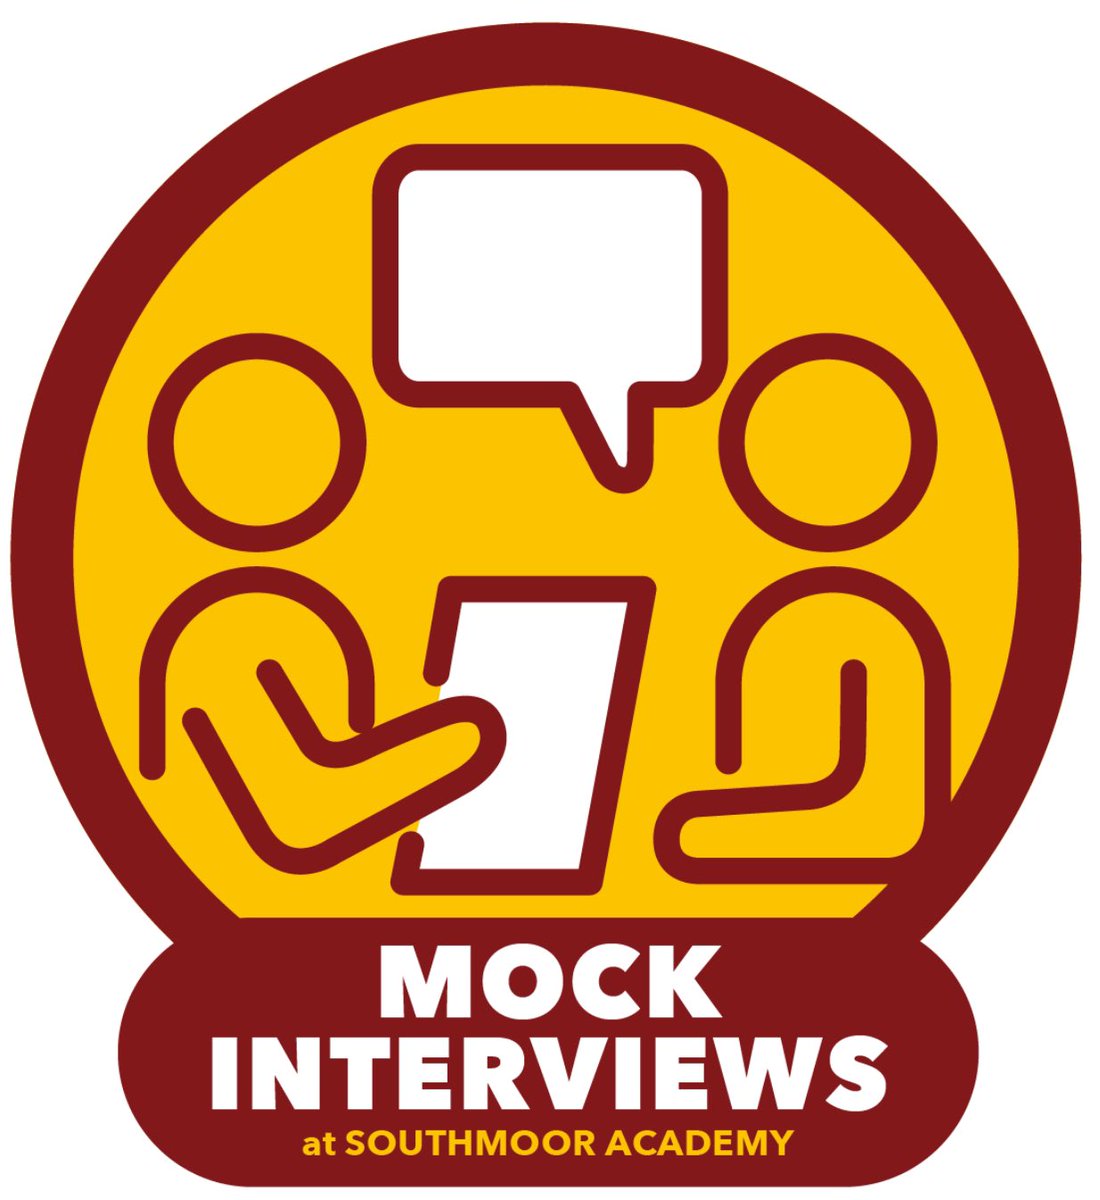 Can you support our Year 10 Mock Interviews? These are taking place on Monday 8 & Wed 10 July. We are looking for organisations & employers who can interview & provide feedback to our students. All resources provided. For more info & register 👉 forms.office.com/e/nwupNj0Wpq #careers